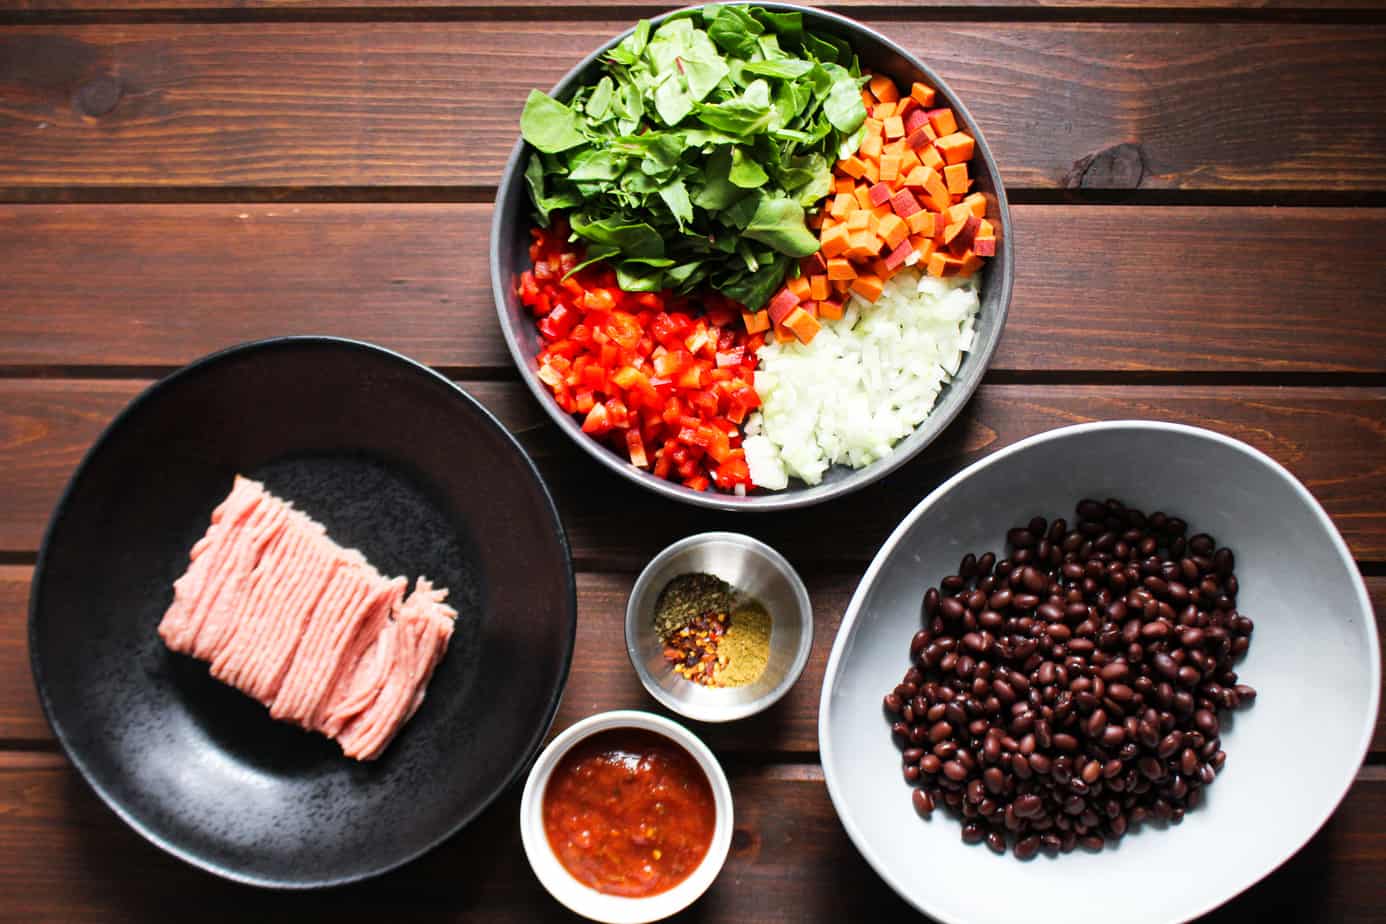 mise en place bowls of raw turkey, minced vegetables, black beans, spices, and salsa